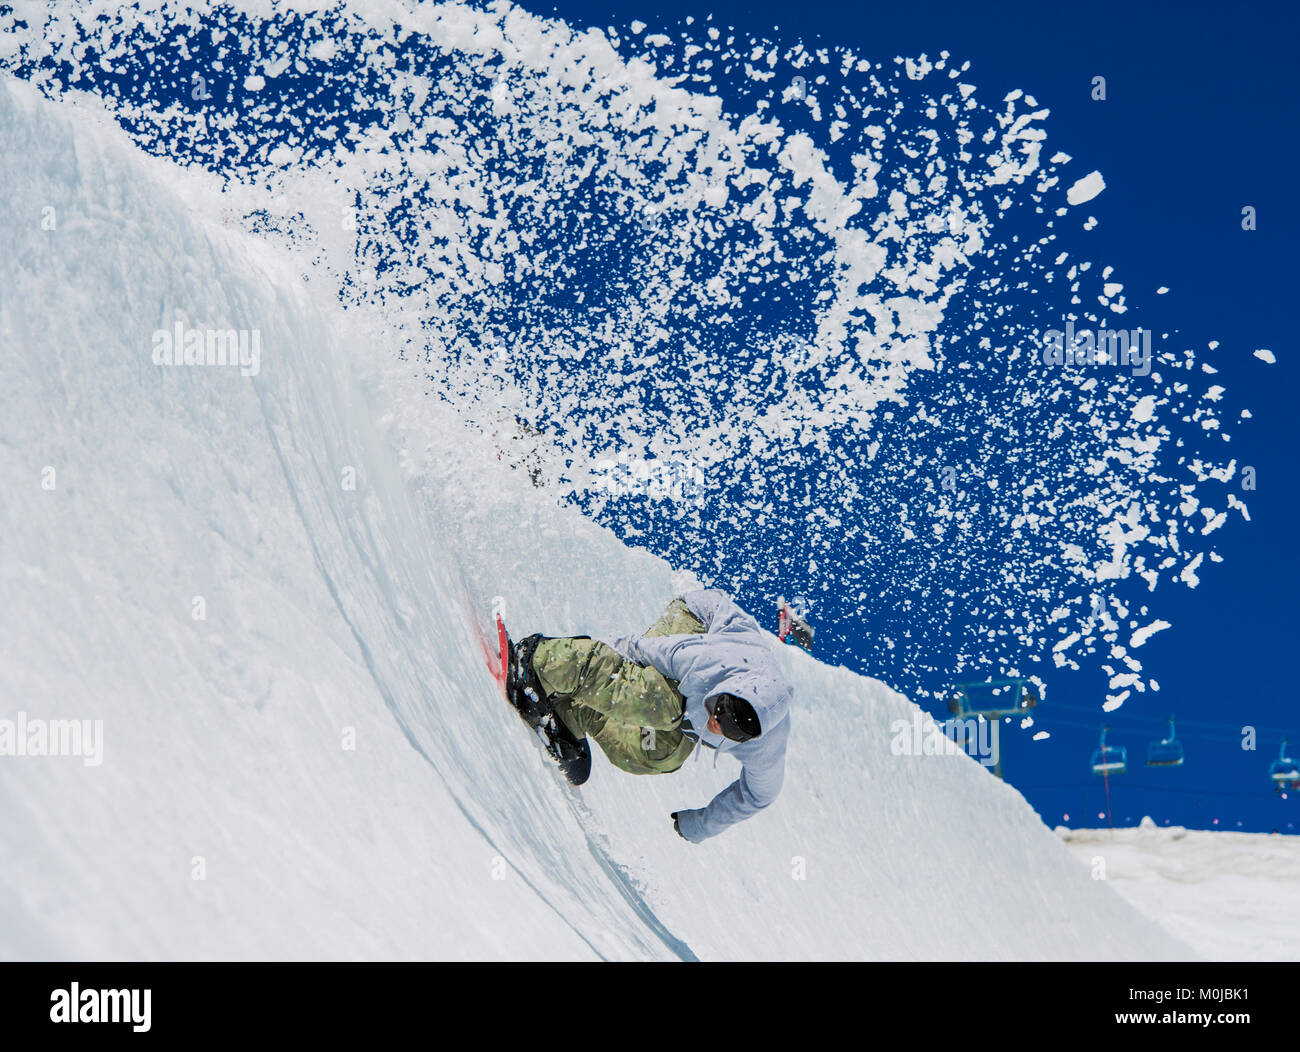 A professional, freeriding snowboarder at High Cascade Snowboard Camp, Mount Hood; Oregon, United States of America Stock Photo